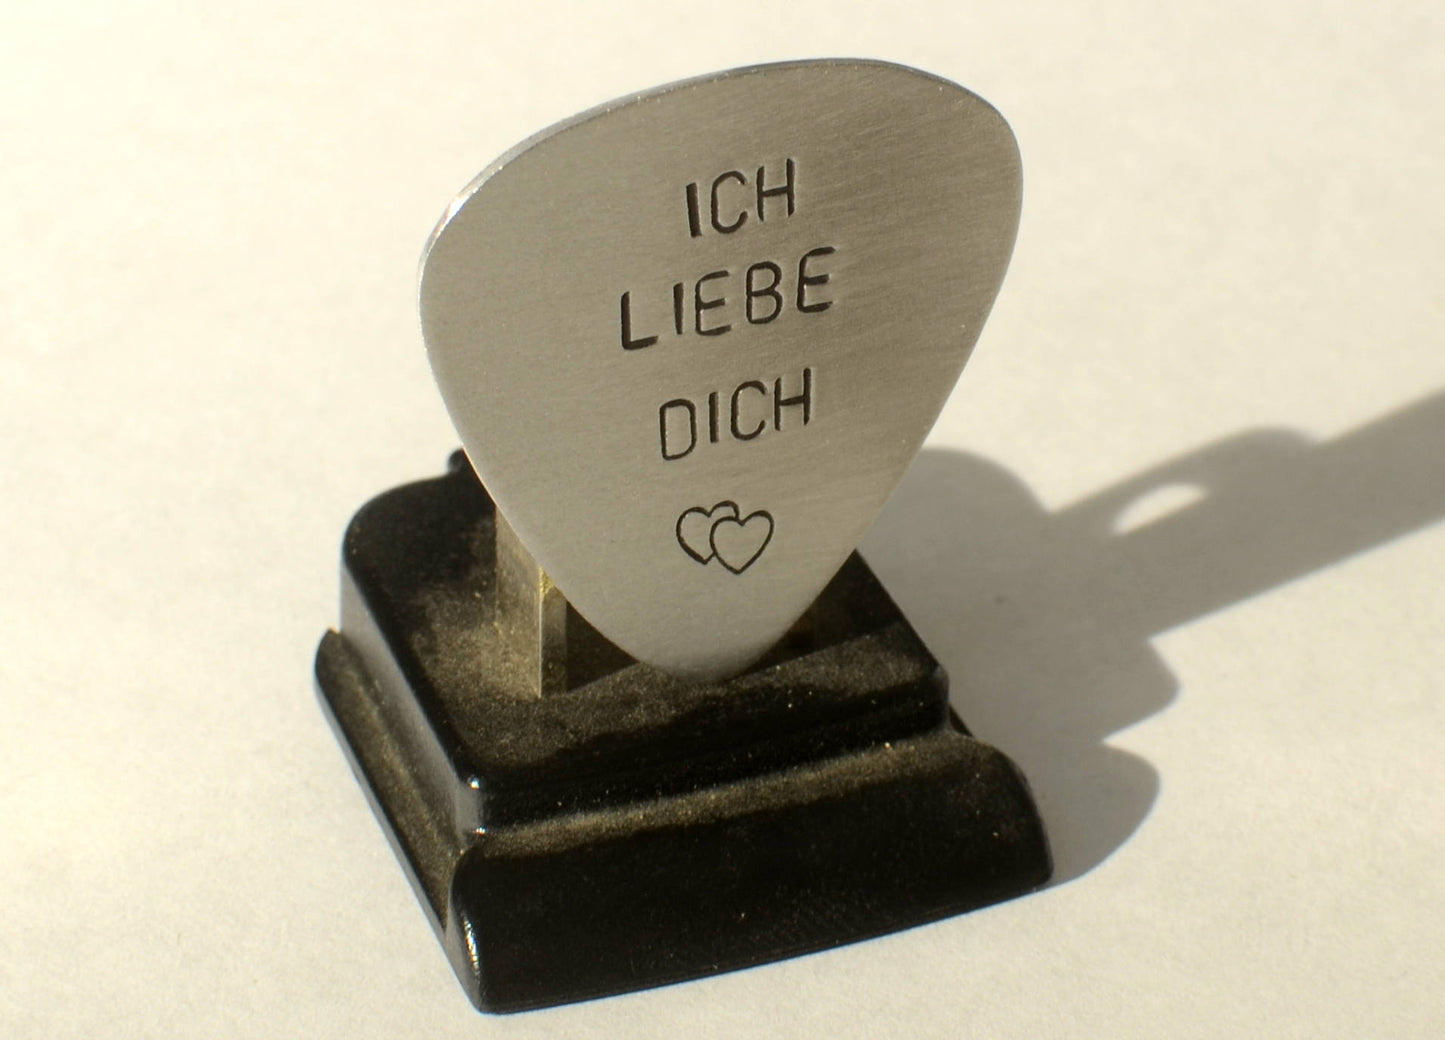 Sterling Silver Guitar Pick Ich Liebe Dich - I Love You in German